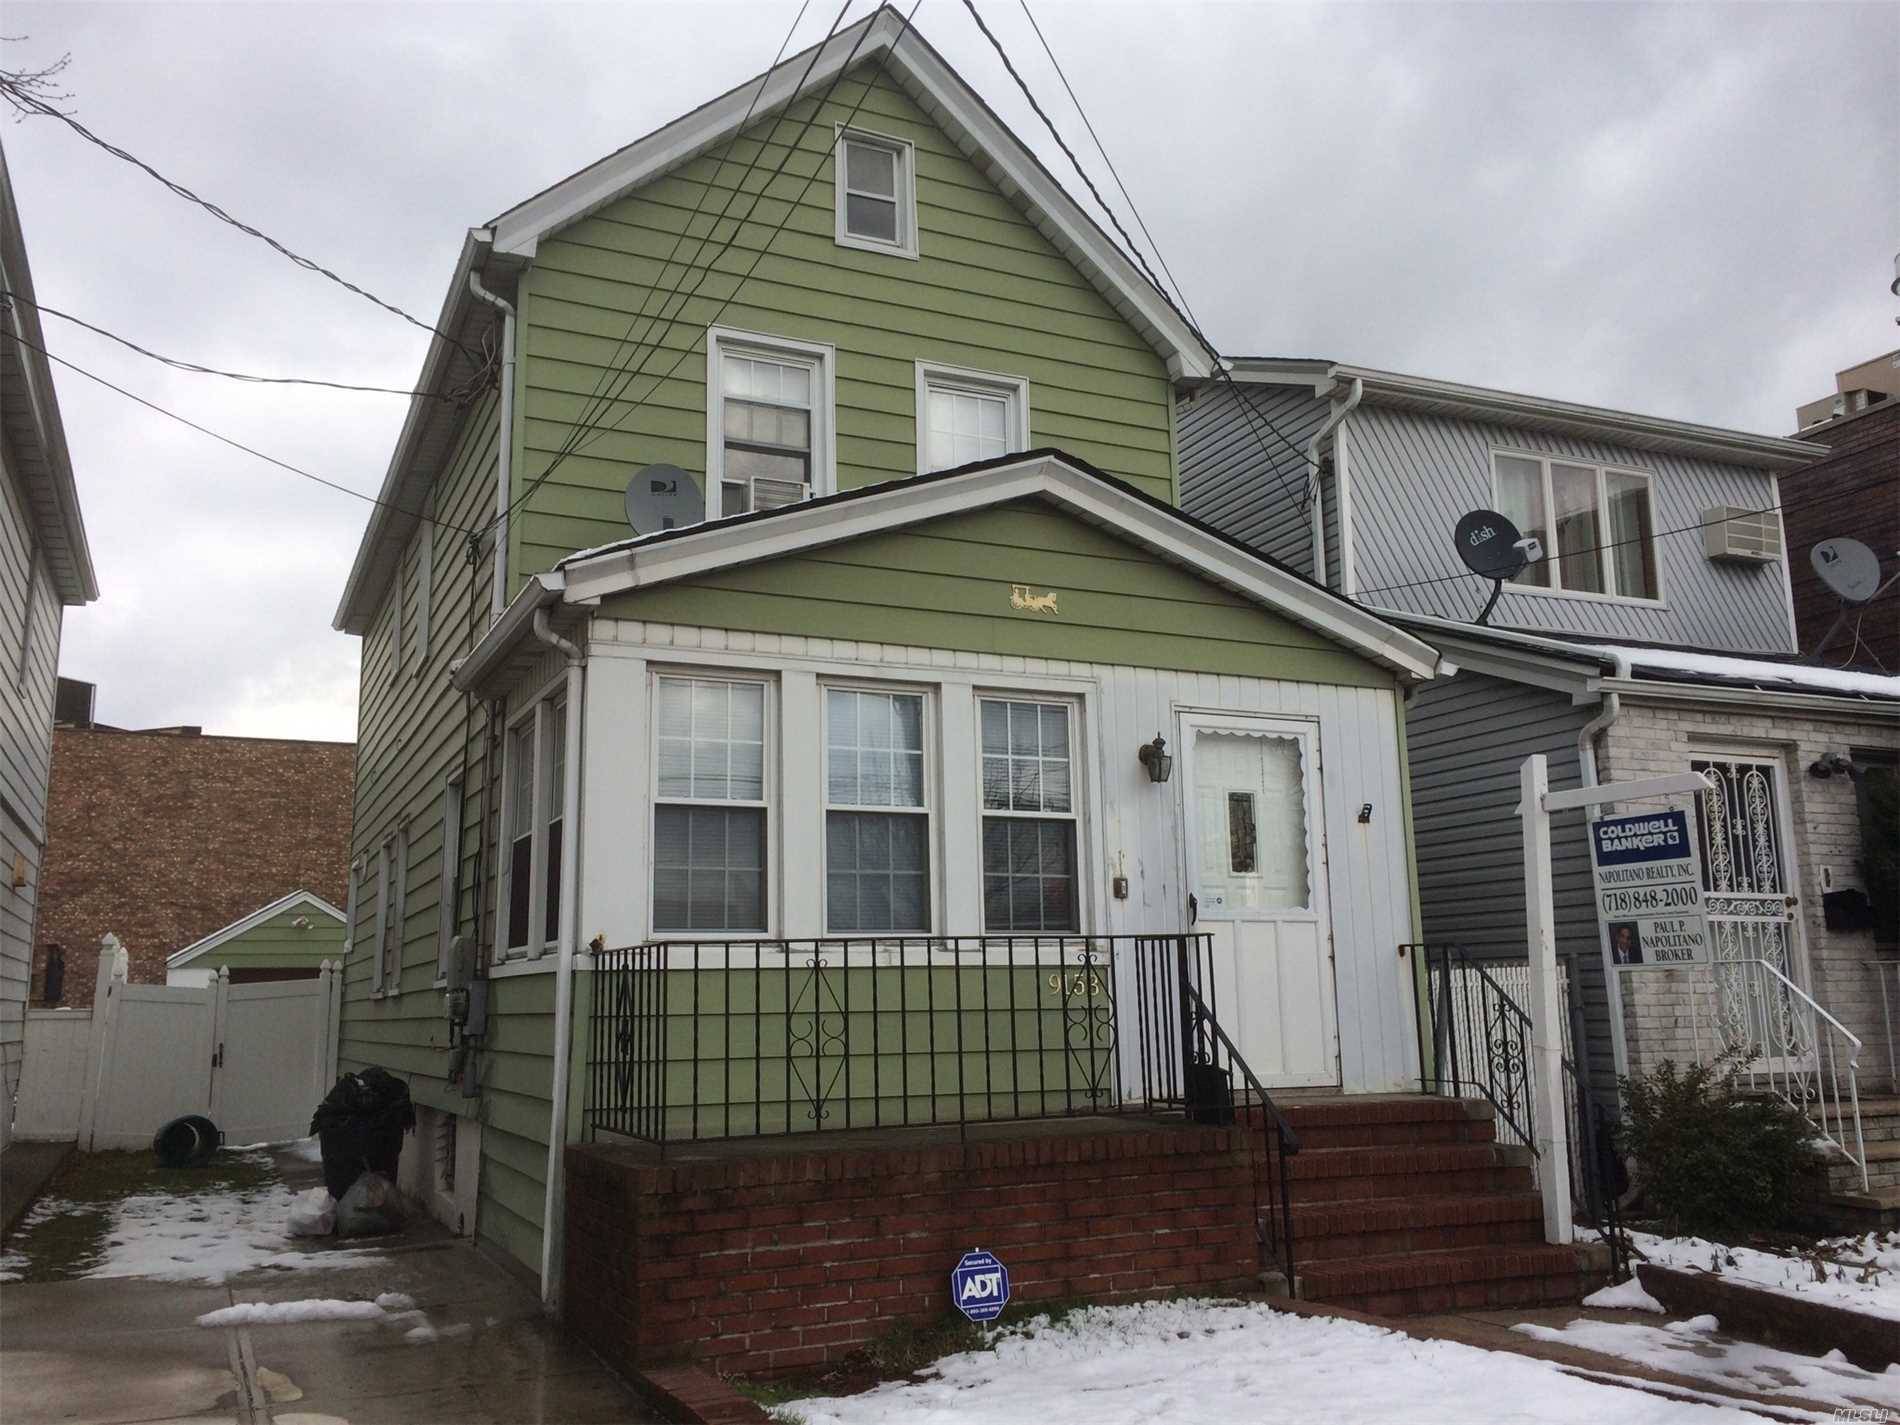 3 BR House Ozone Park LIC / Queens